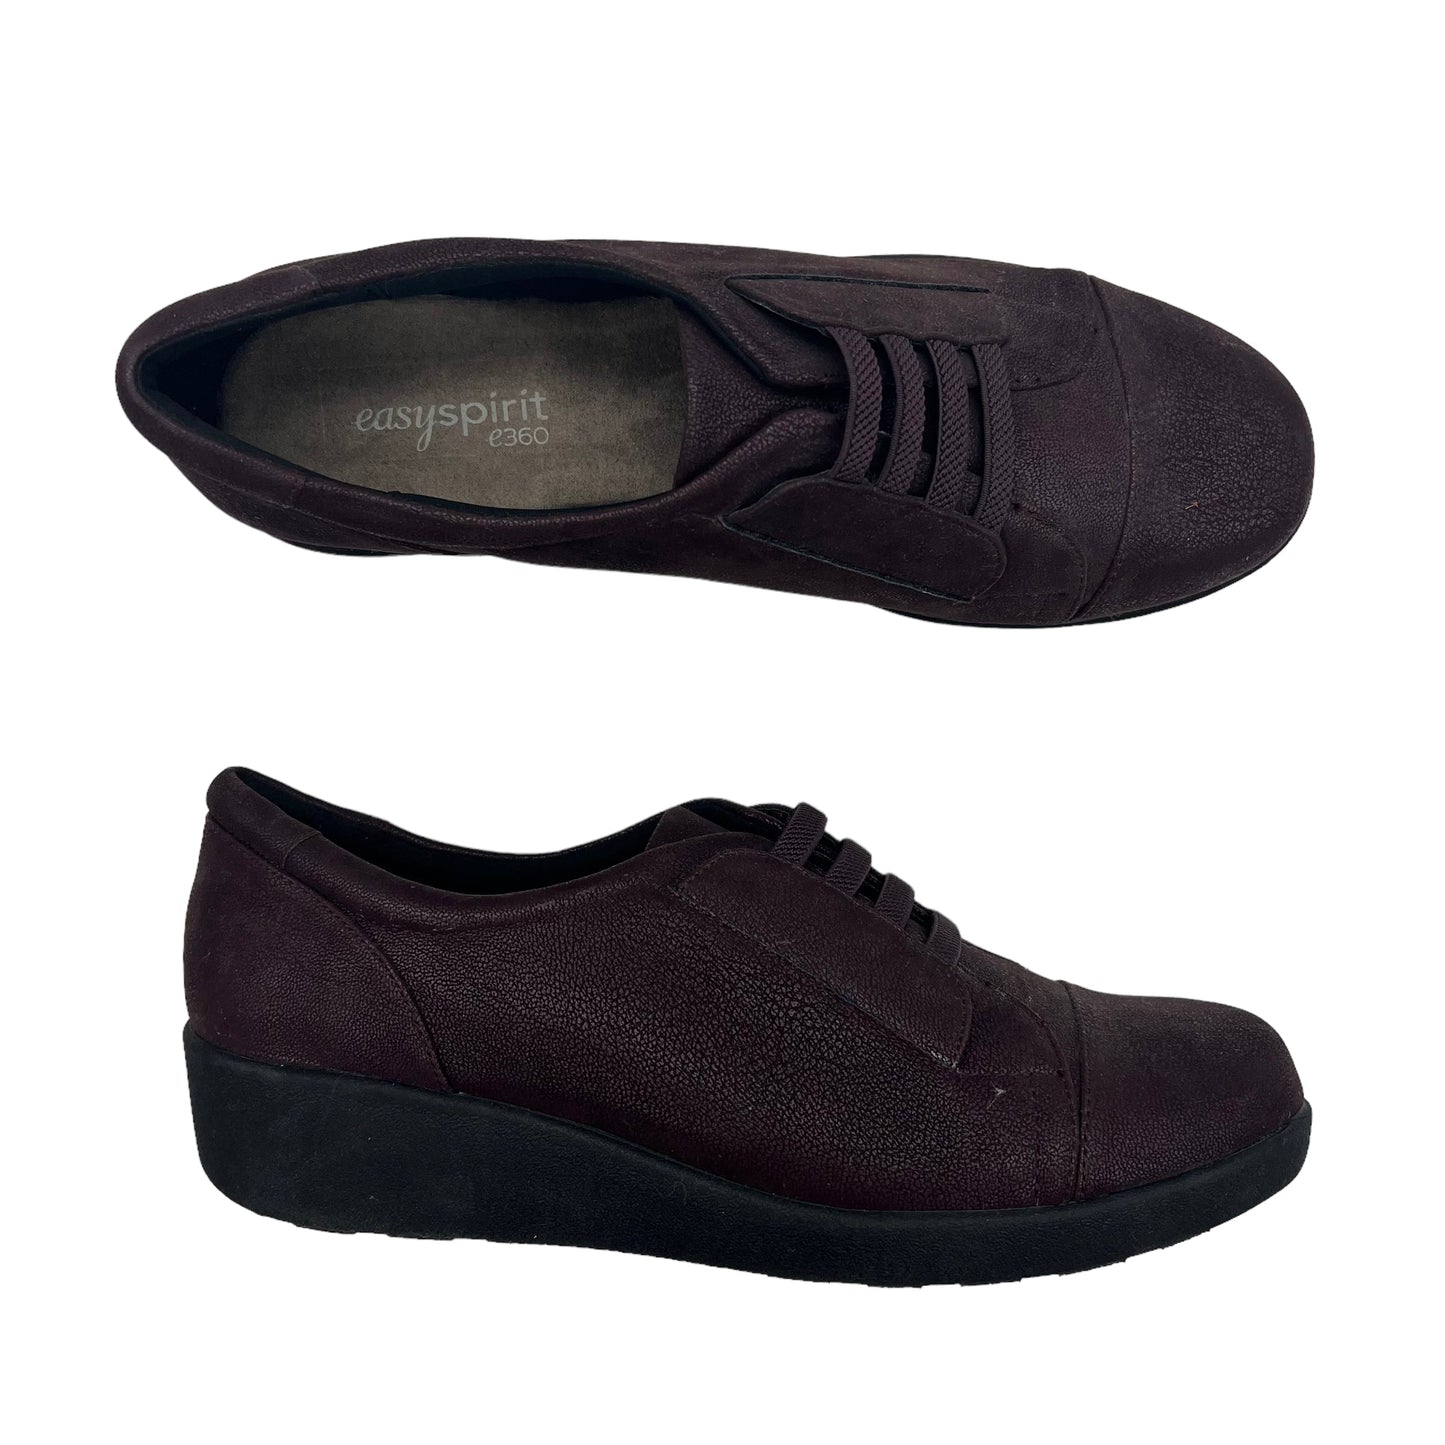 Shoes Sneakers By Easy Spirit  Size: 9